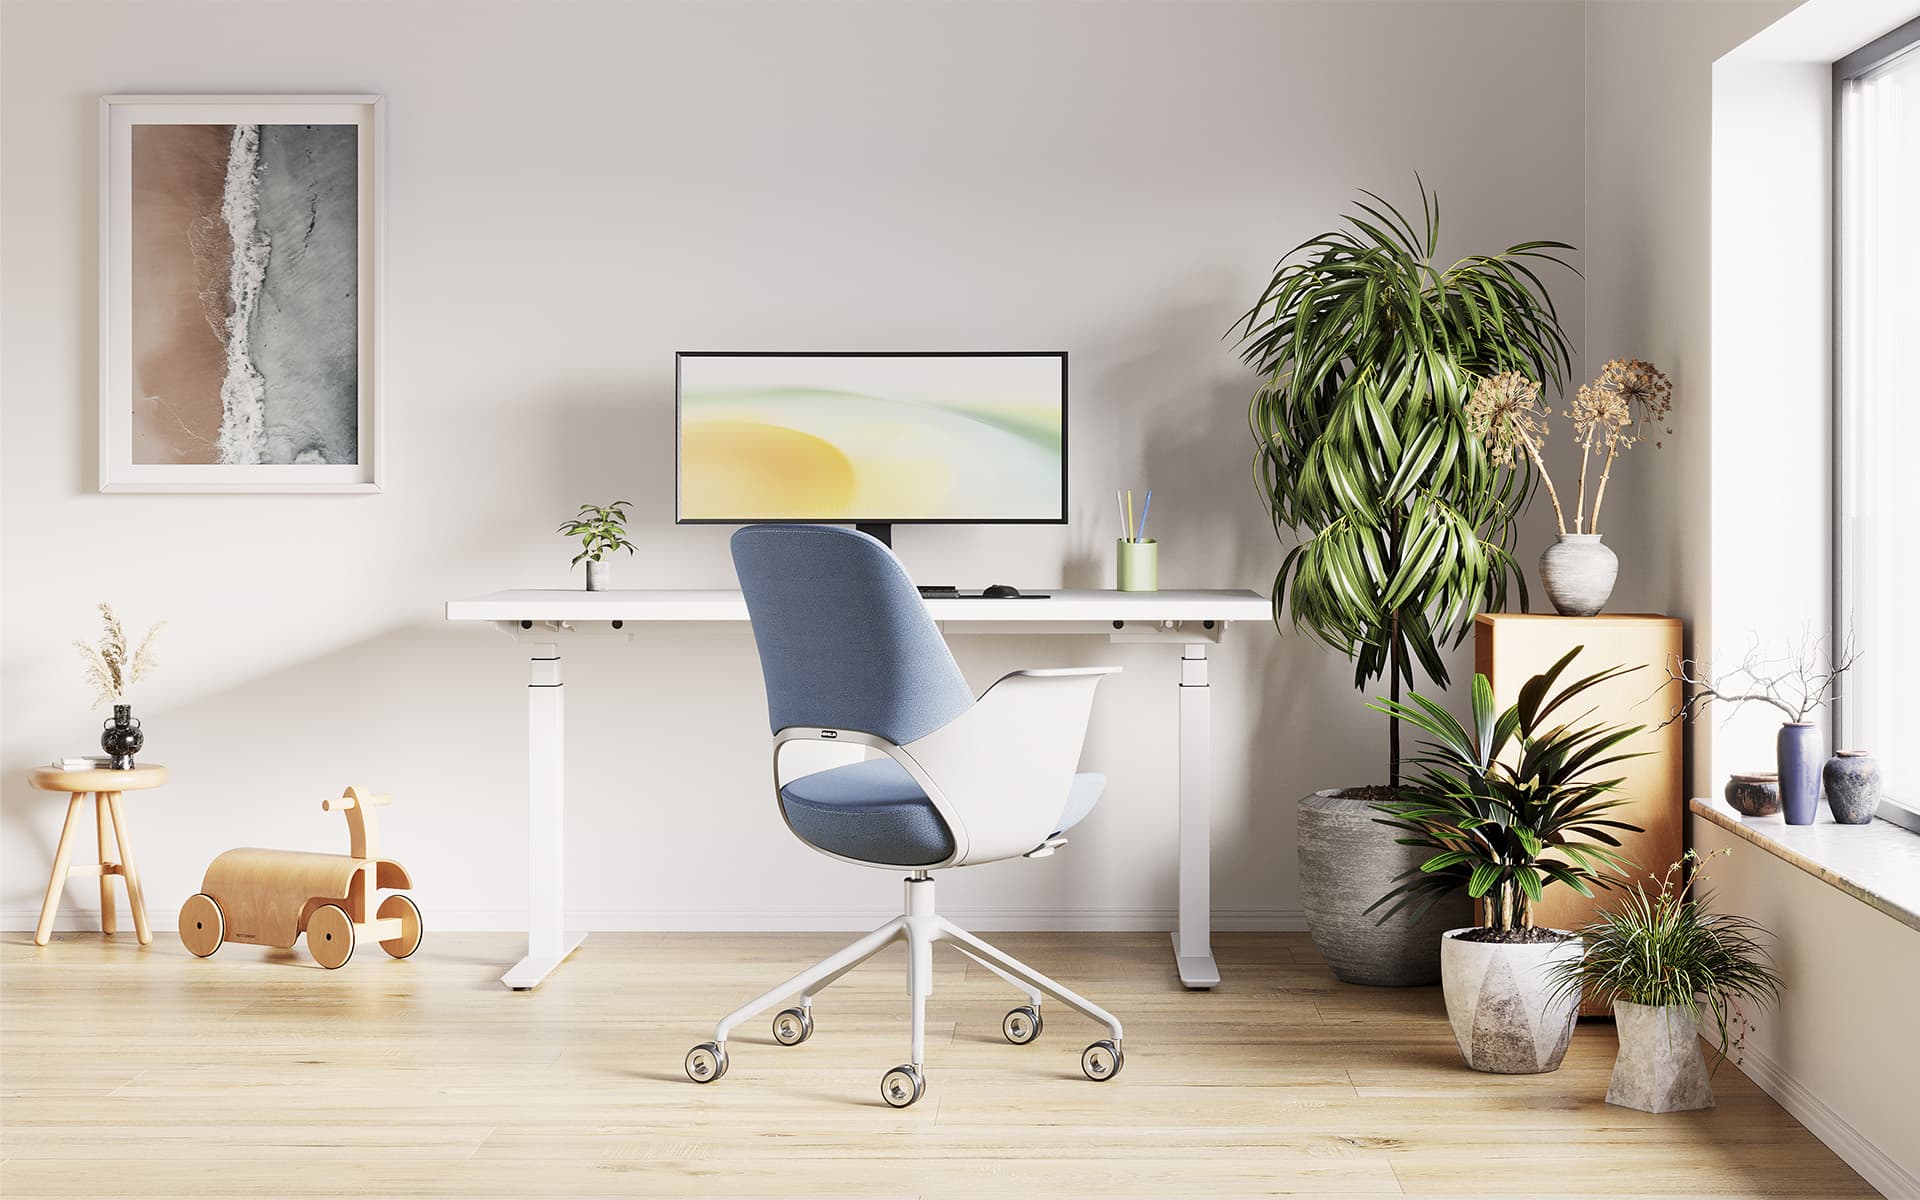 Blue Henglin Caia office chair by ITO Design in a modern home workplace